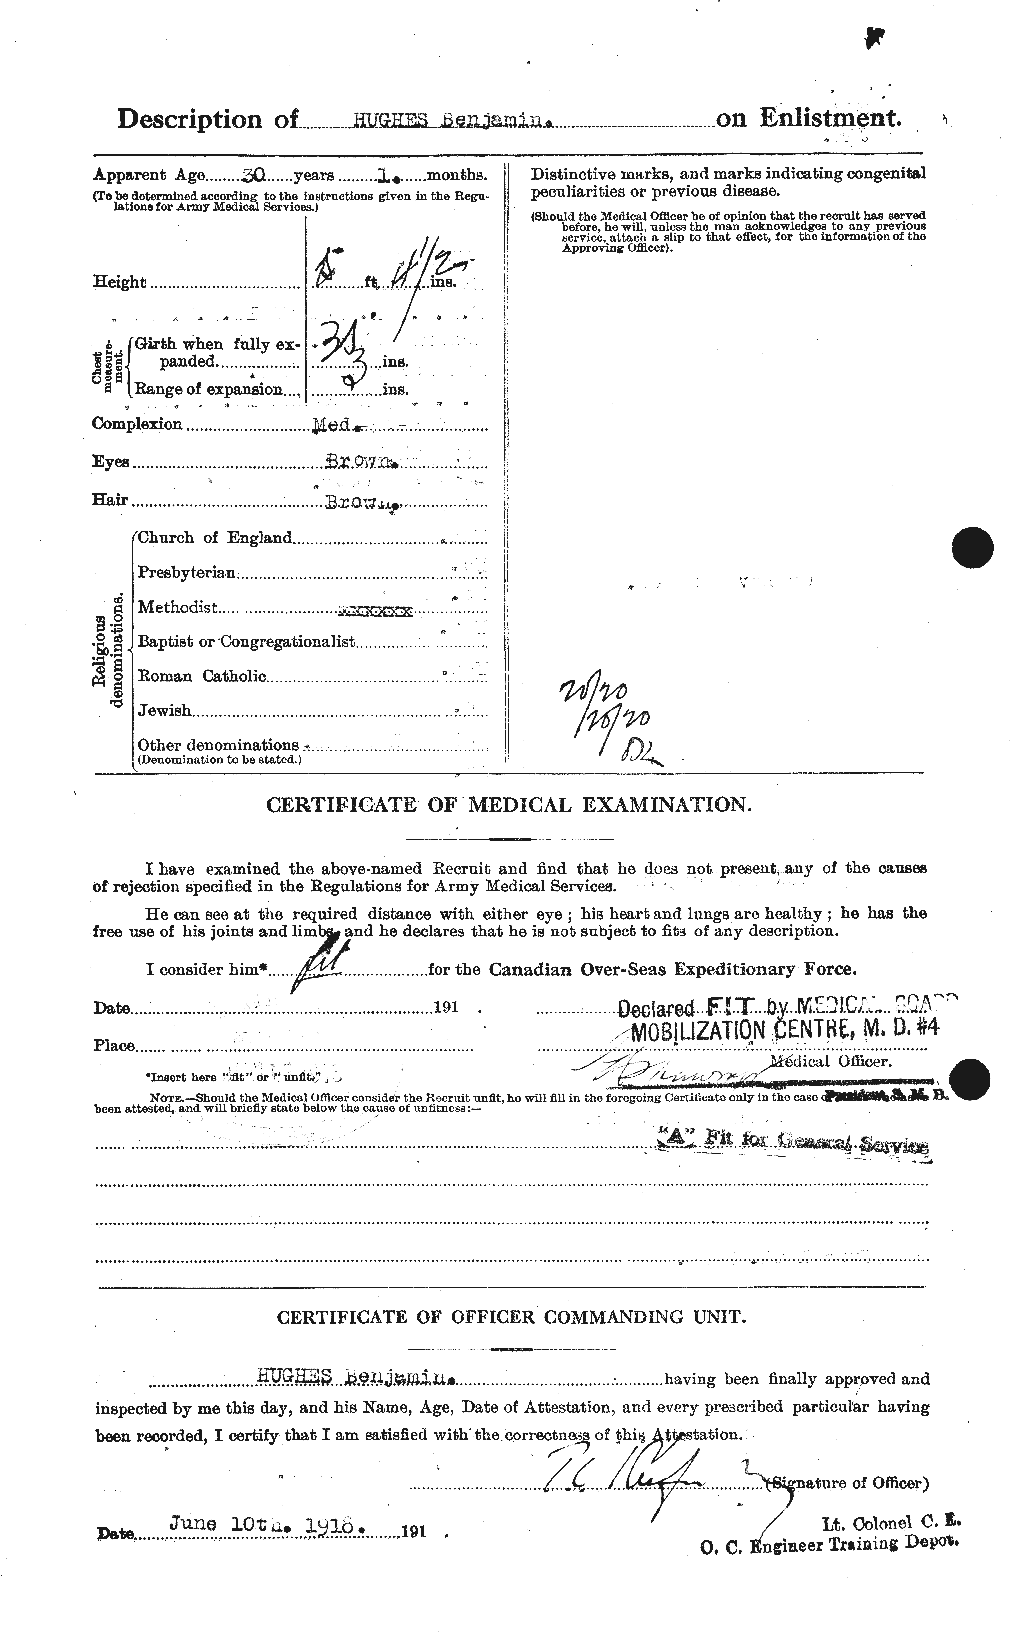 Personnel Records of the First World War - CEF 402576b